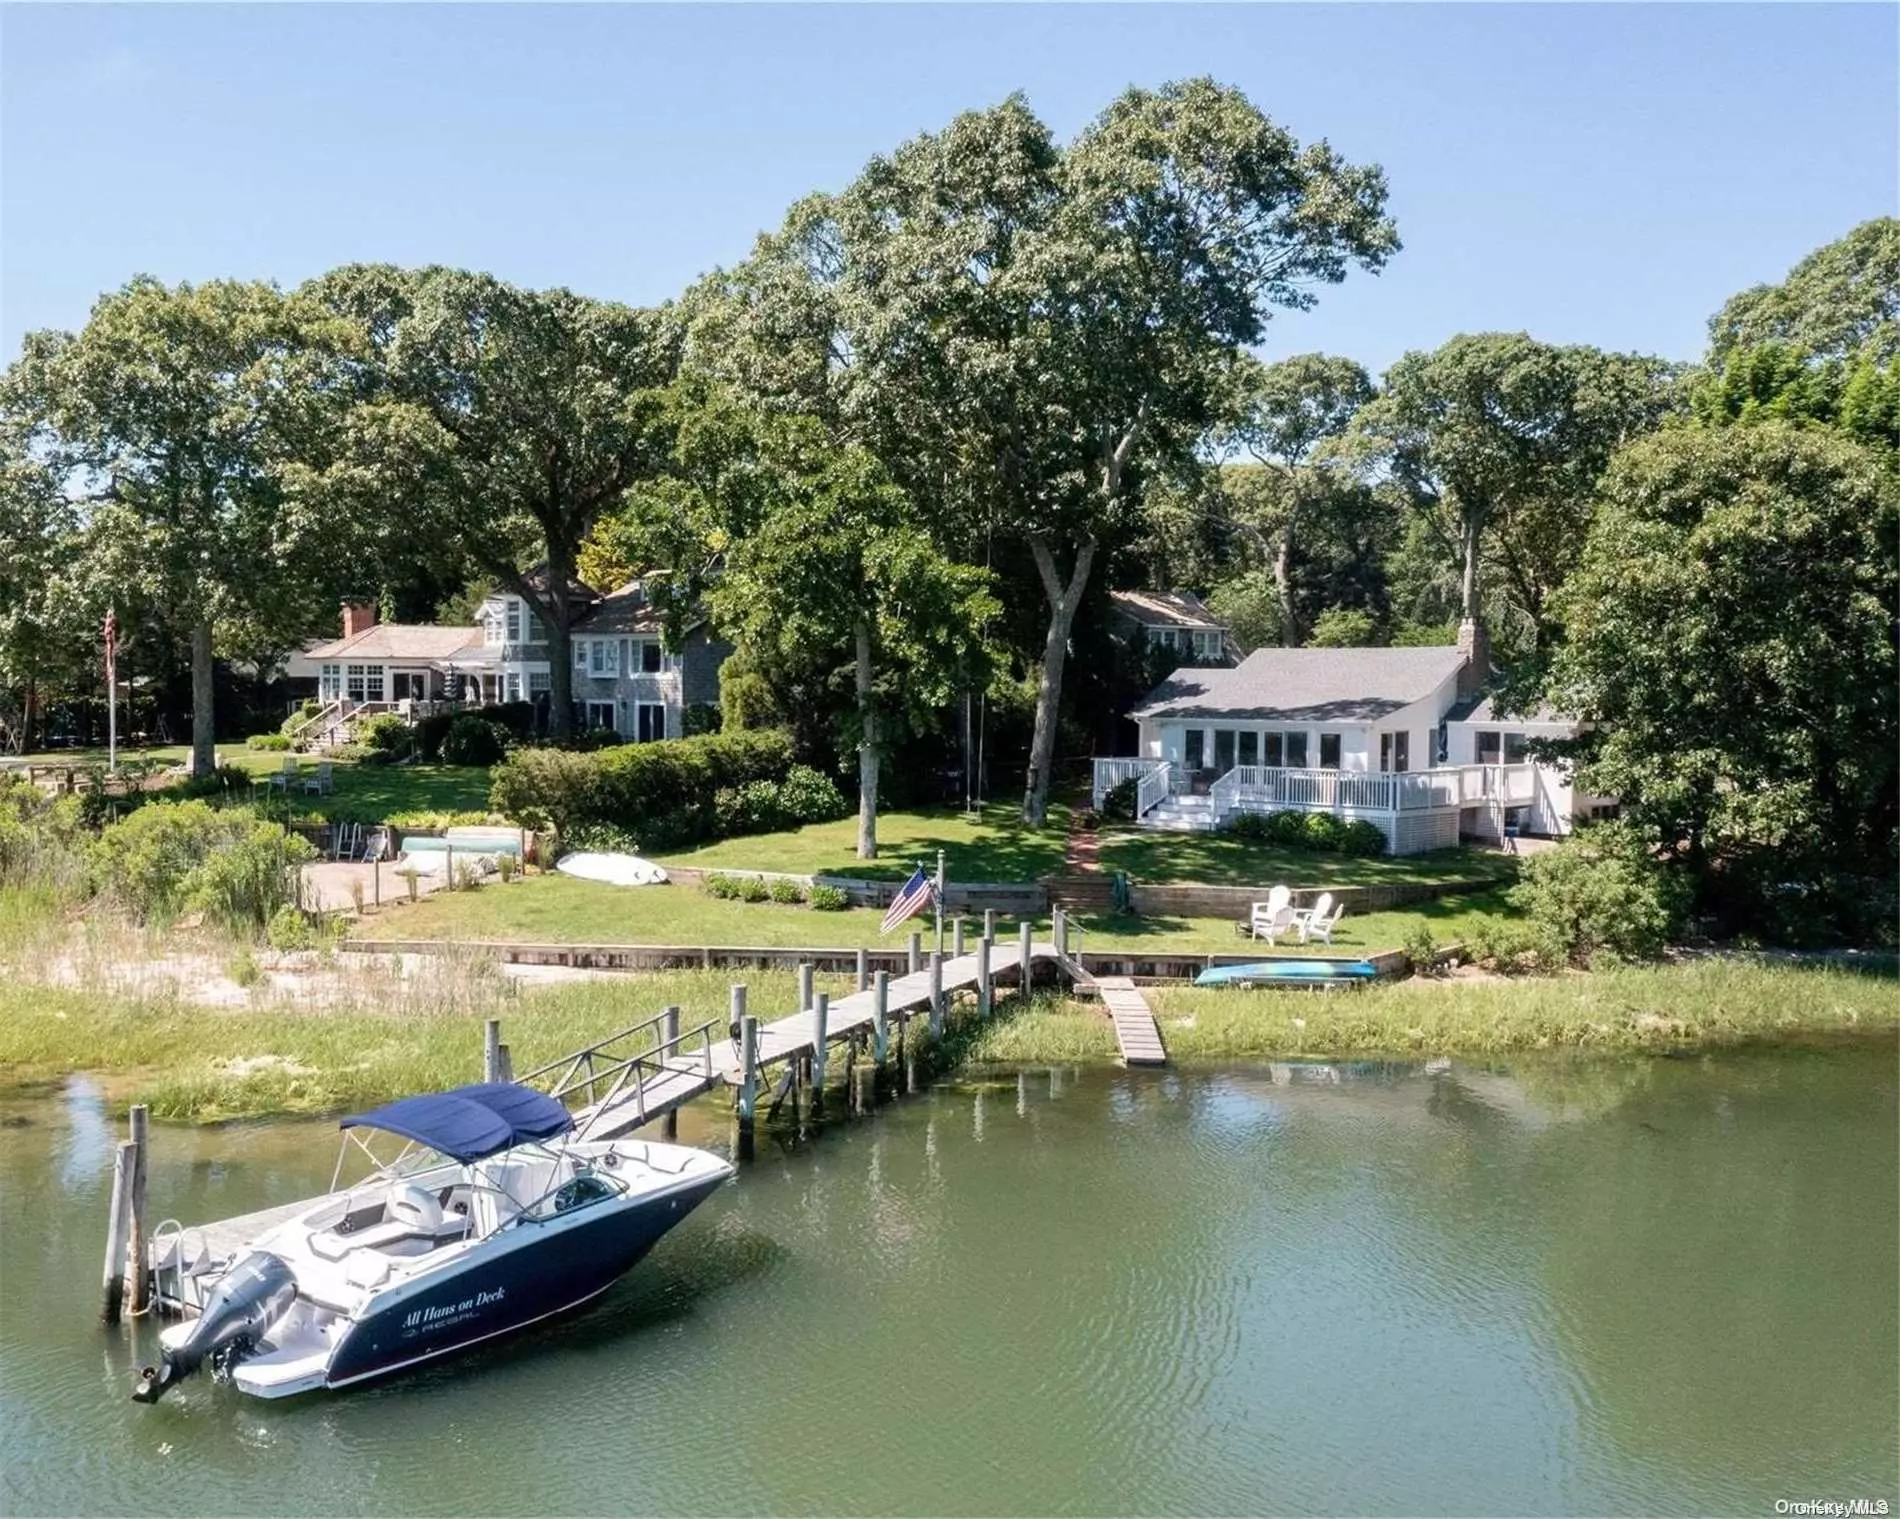 Newly renovated white & bright waterfront with views of the creek and Peconic Bay from every room, and deep-water dock with easy access to the Bay. Custom eat-in kitchen, living room with wood burning stone fireplace, dry-bar, and dining, all in an open floor plan with soaring vaulted ceilings. Large windows face the water with sliding glass doors that lead out to a large deck, equipped with outdoor speakers, perfect for entertaining. Room for pool, outdoor fireplace, and outdoor shower. Close to Nassau Point Causeway Beach, North Fork Vineyards, and farmstands. A chic boaters paradise!